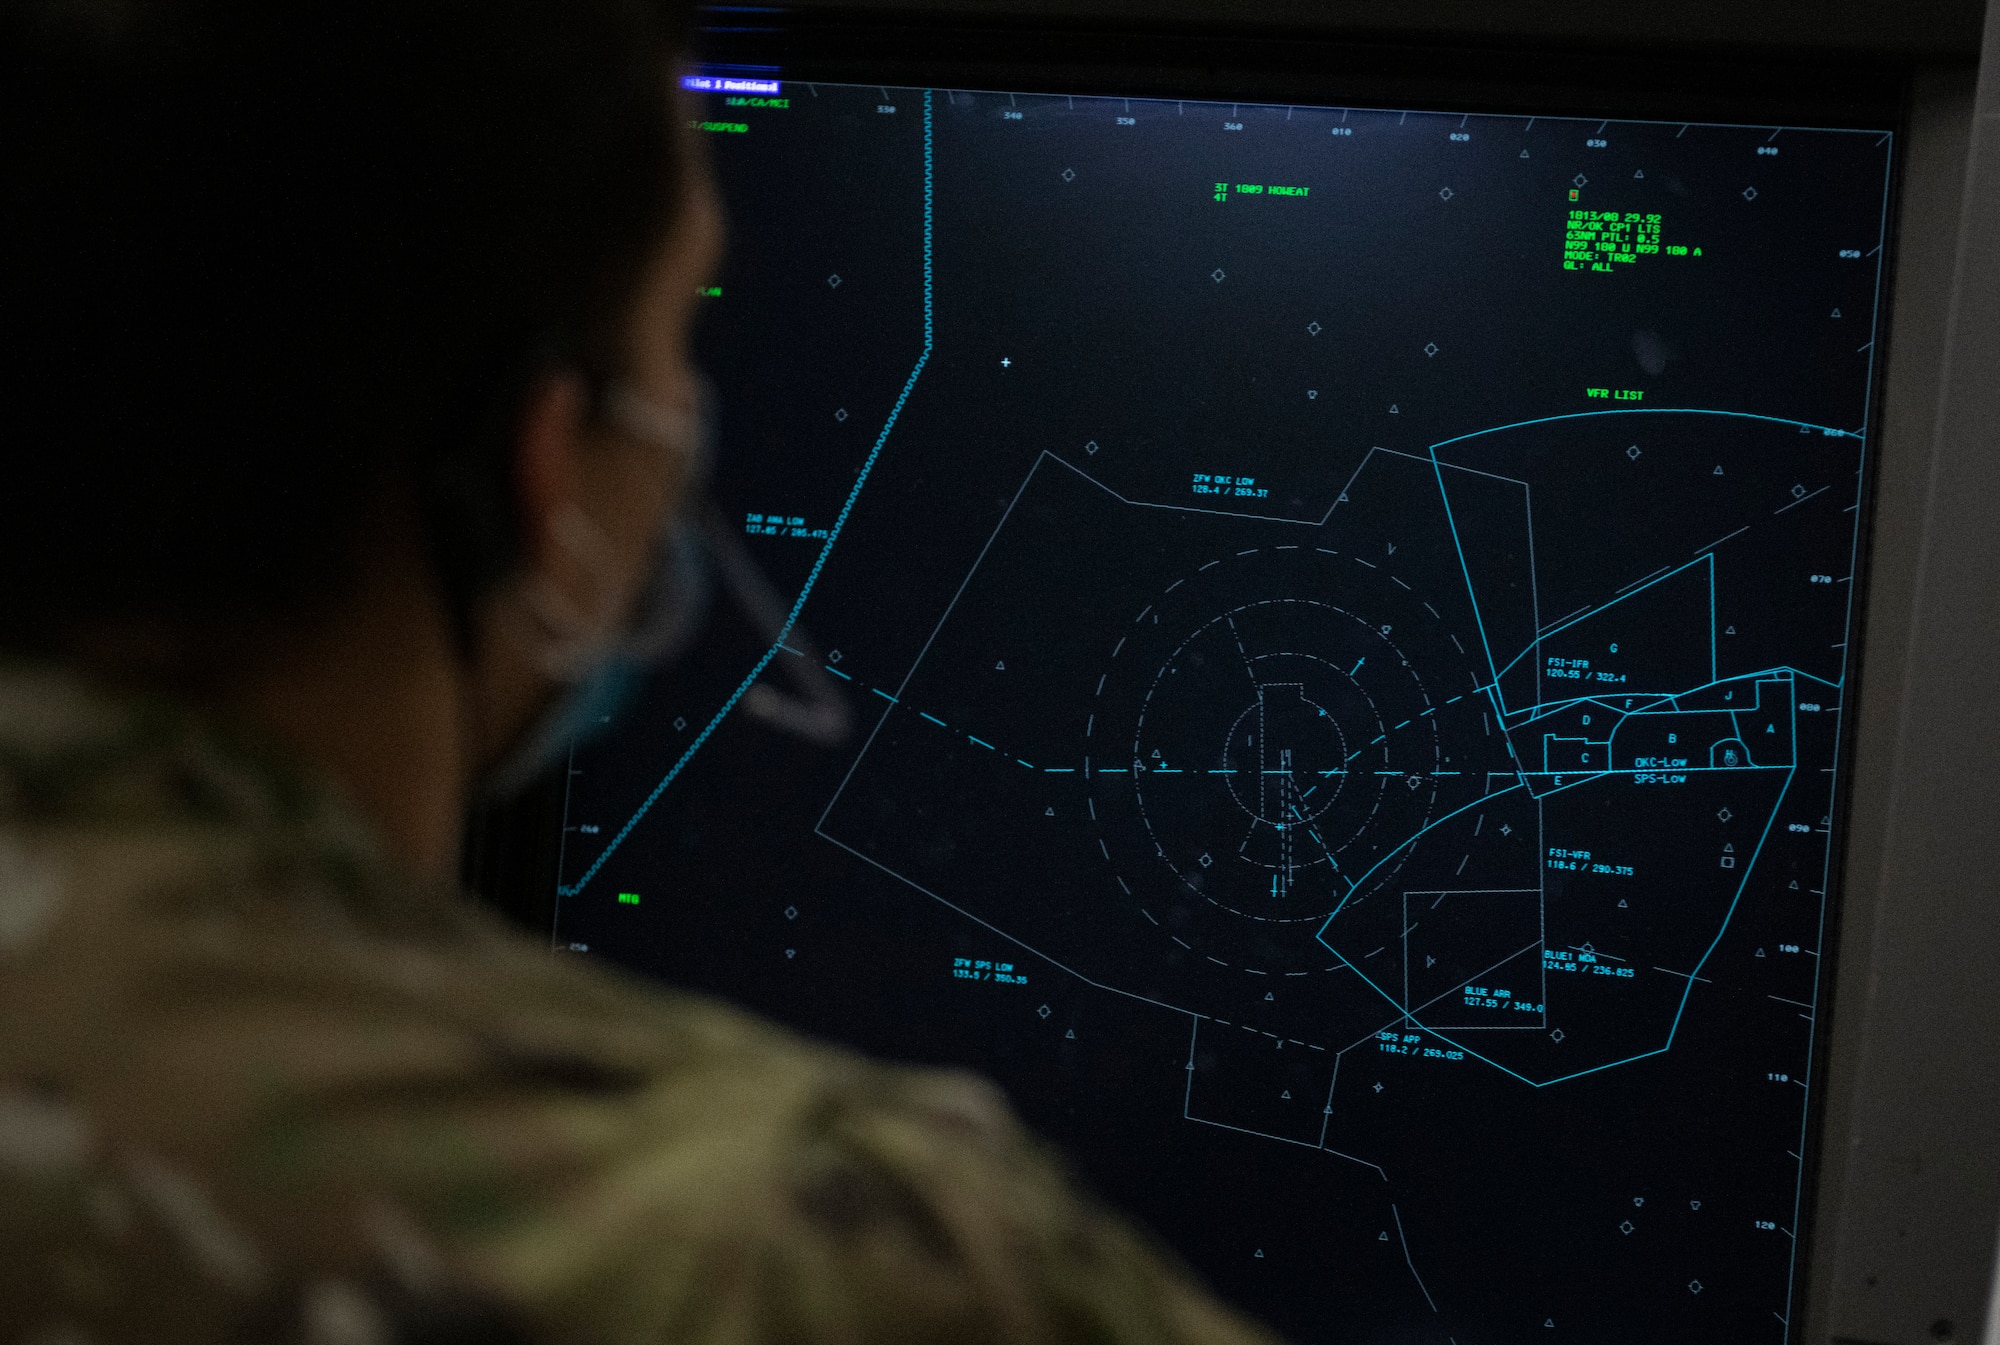 Airman 1st Class Ashtan Howell, 97th Operations Support Squadron Radar Approach Control (RAPCON) air traffic controller, views an airspace radar display screen at Altus Air Force Base, Oklahoma, Jan. 11, 2020. Each base has a different area of responsibility for RAPCON controllers. In Altus, the area stretches approximately 40 miles in each direction of the base and ranges from the ground to 9,000 feet in the air. (U.S. Air Force photo by Senior Airman Breanna Klemm)